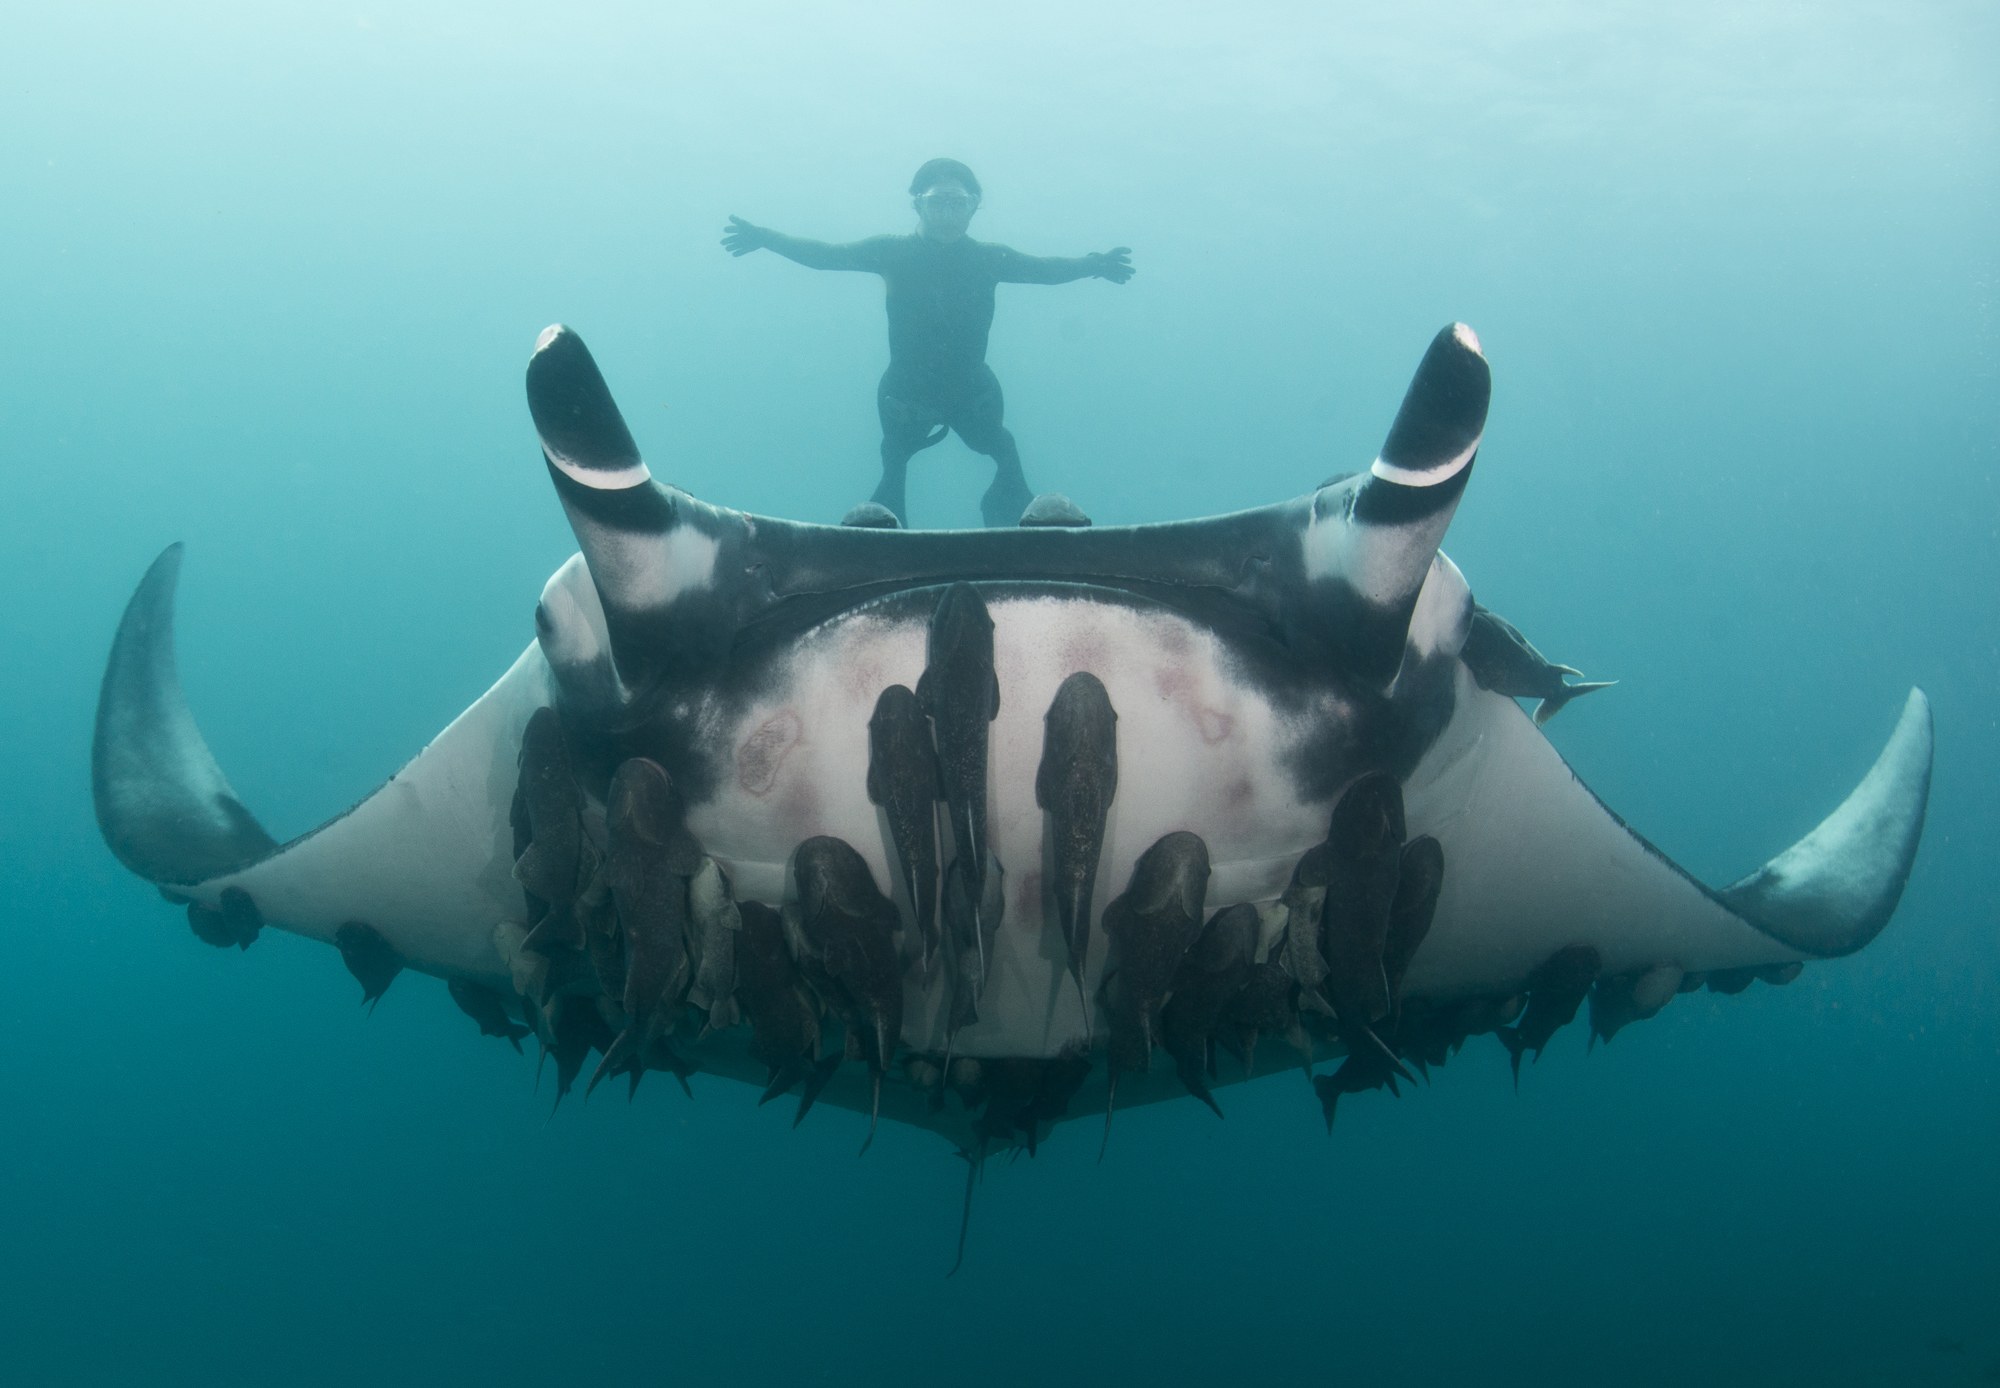 Meet the Scientist Snapping Selfies With Giant Manta Rays | WIRED